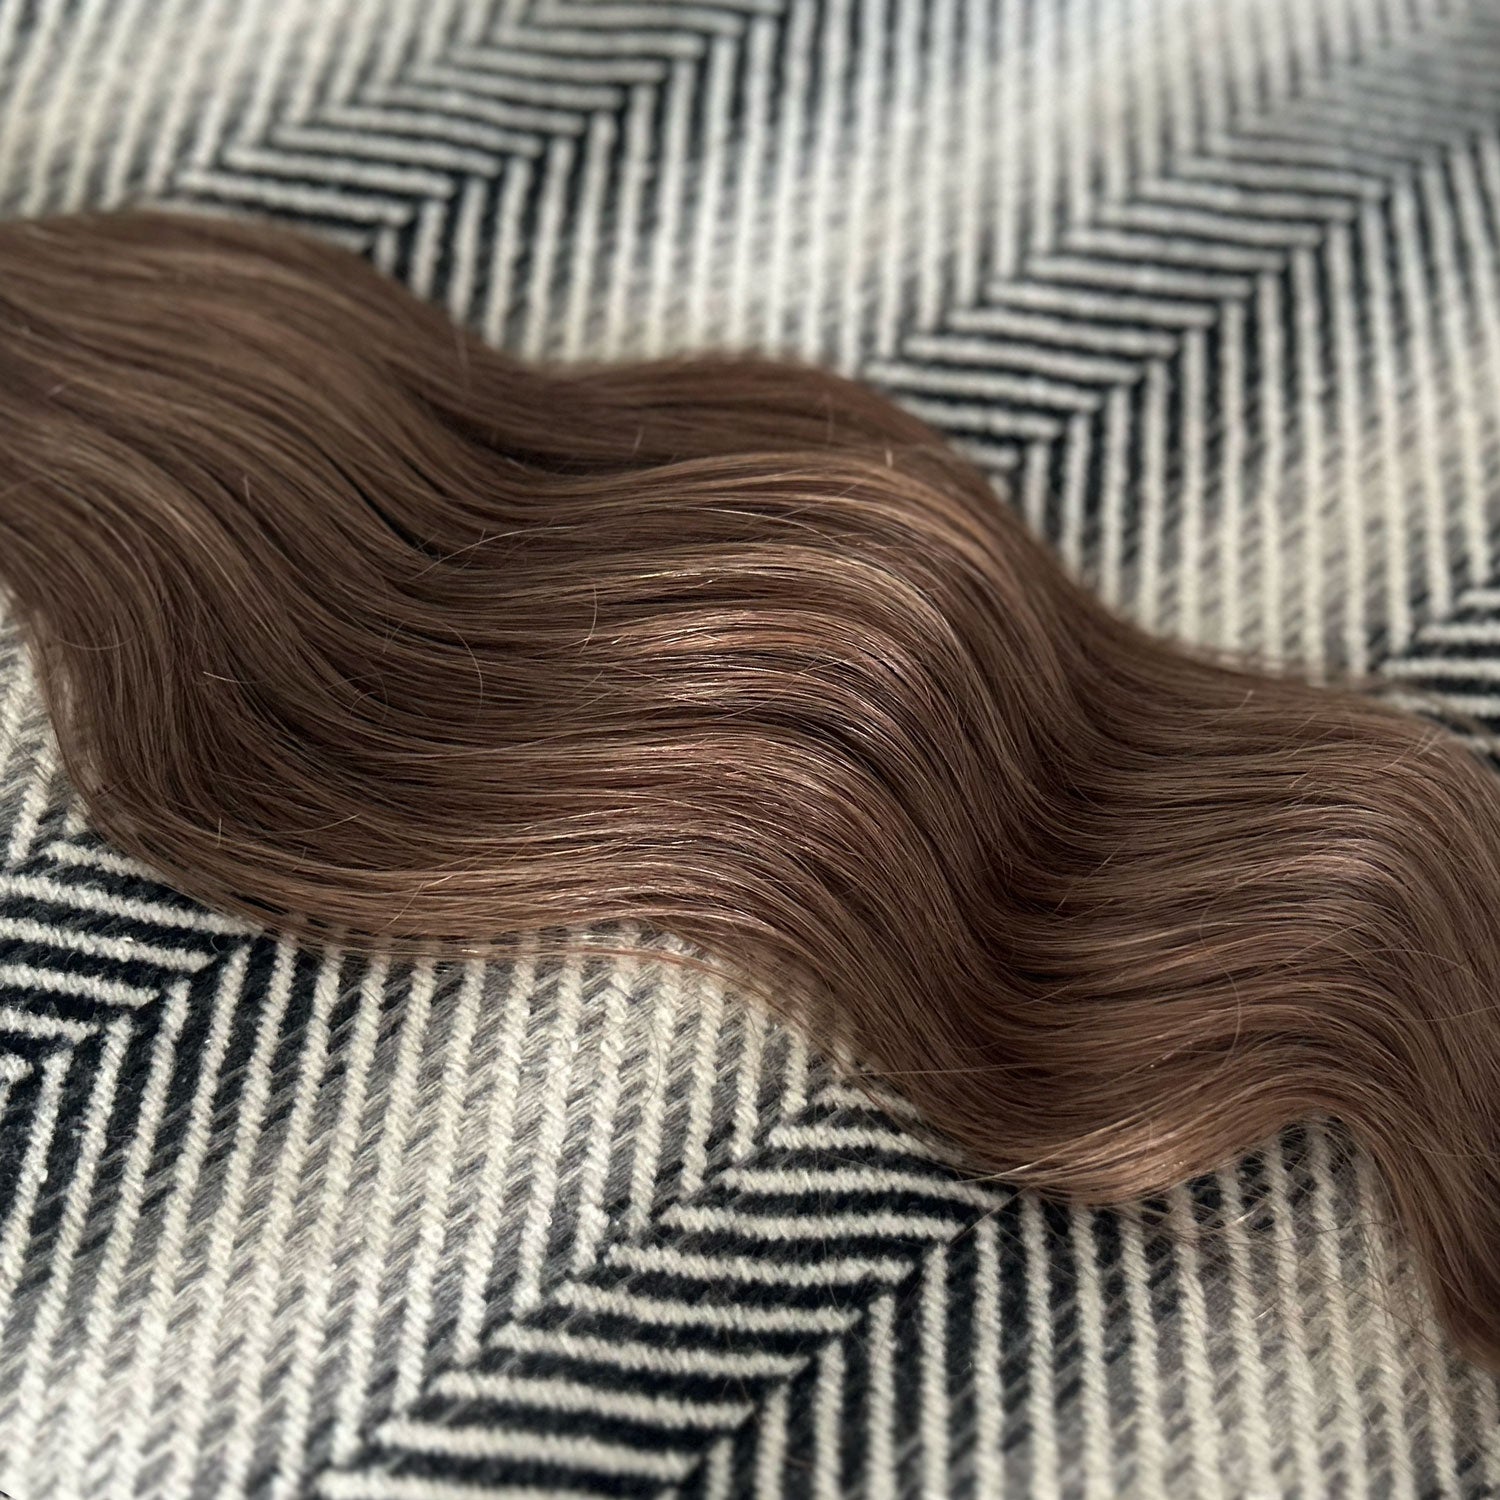 Clip In Wavy Human Human Hair Extensions #8a Ash Brown 22 Inch